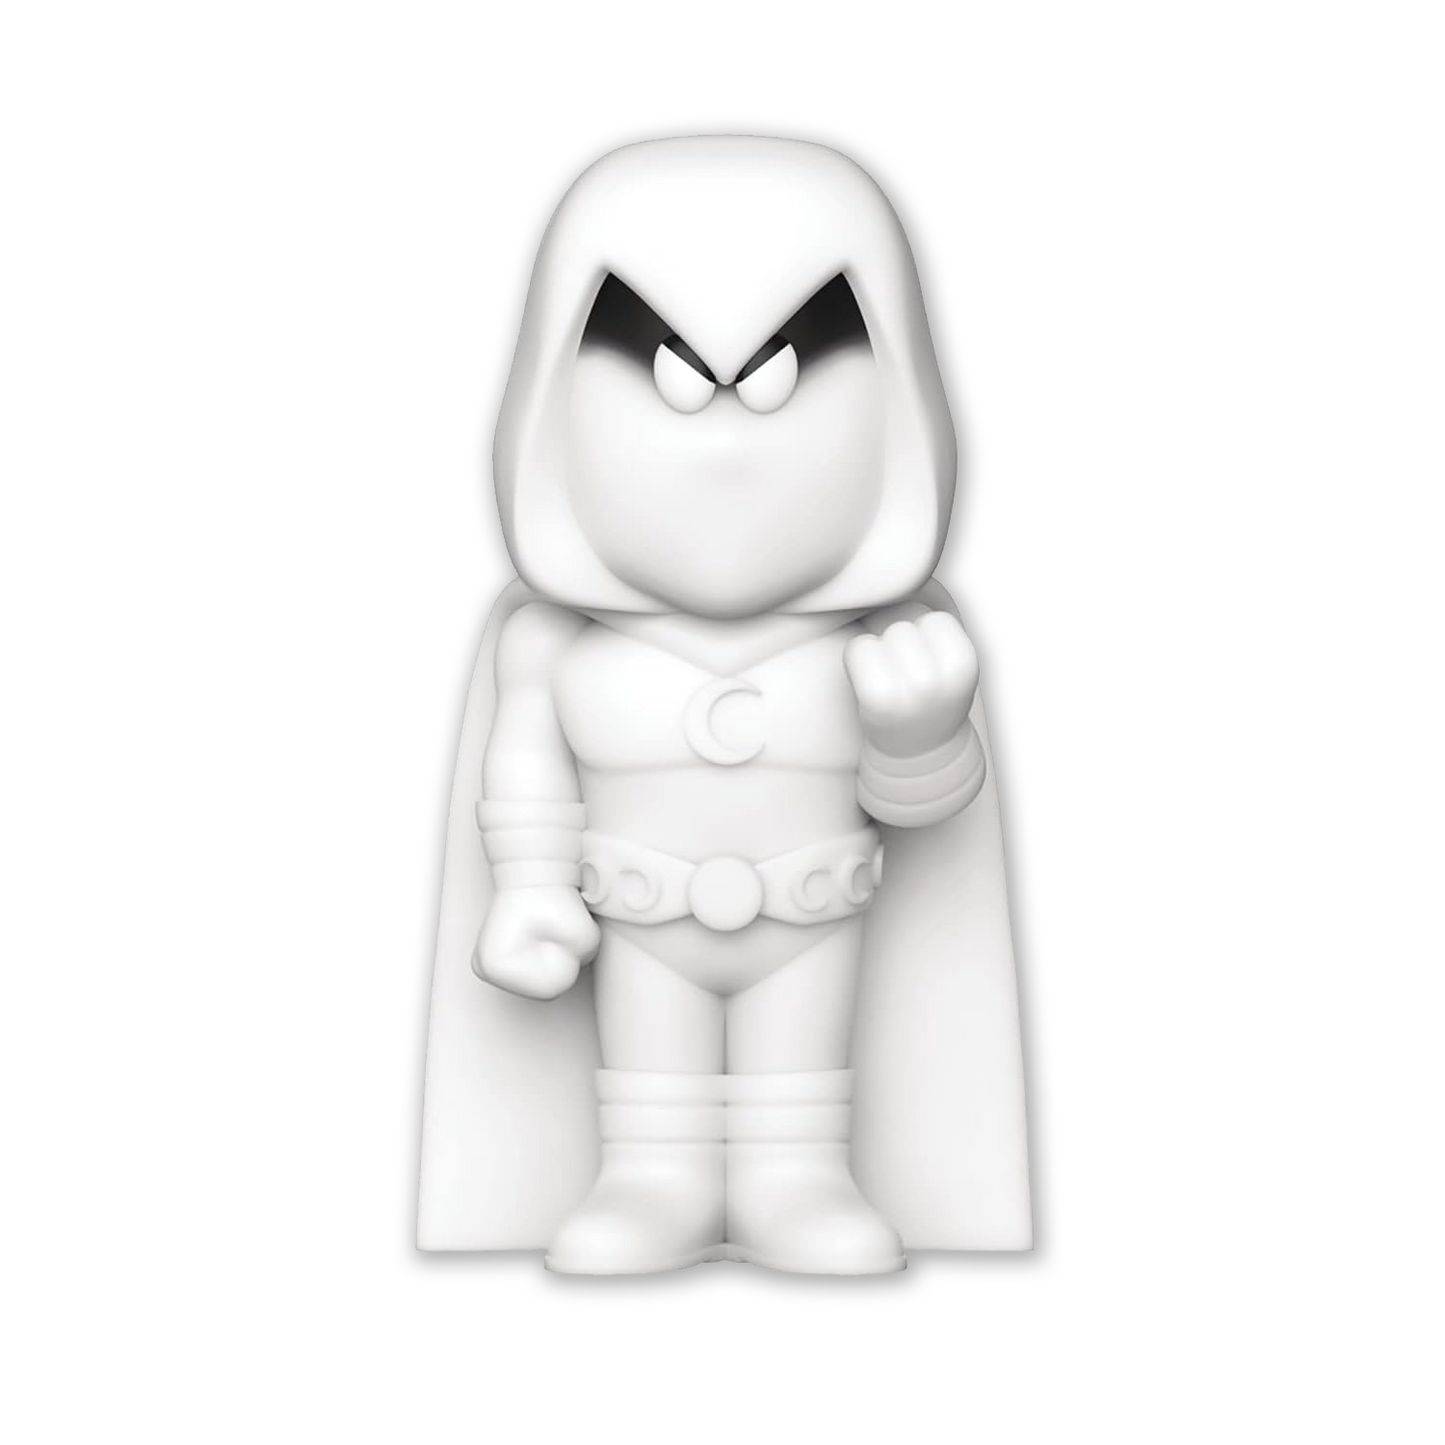 Moon Knight Vinyl figure retro, styled after the comic book